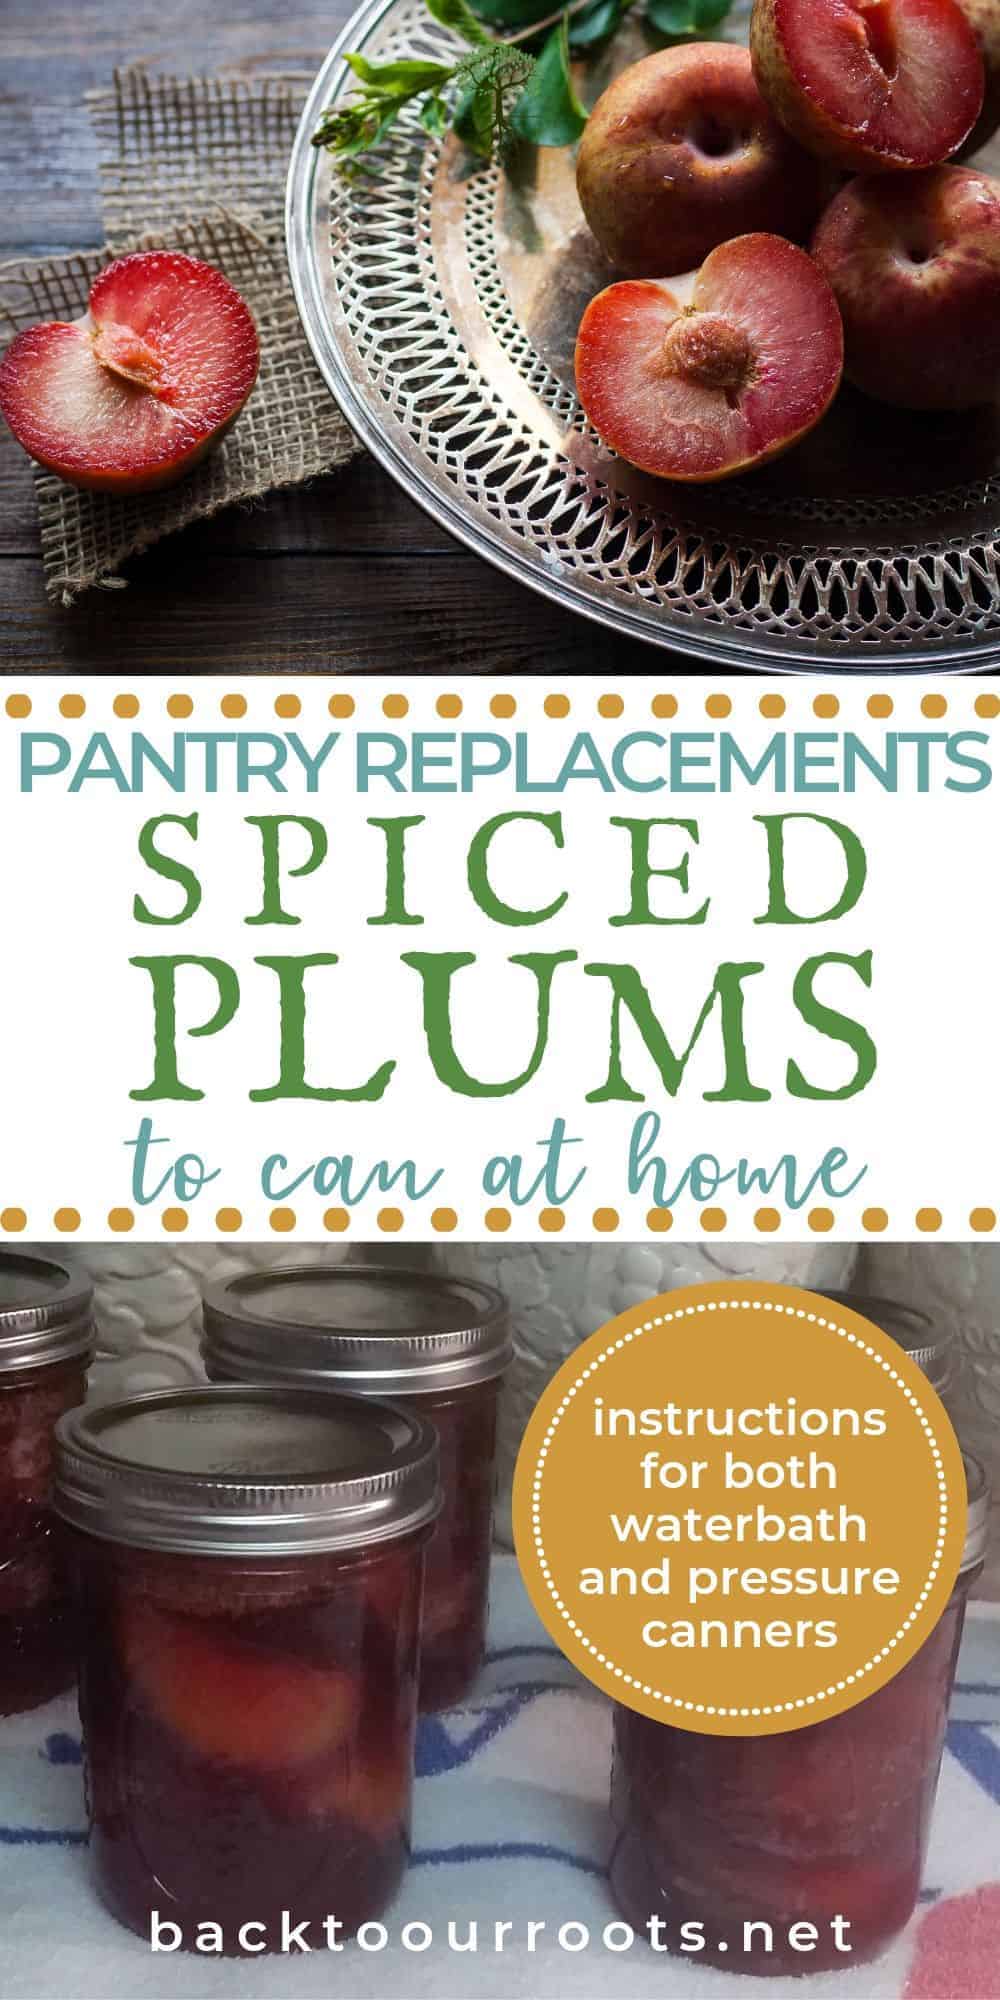 How to Can Spiced Plums